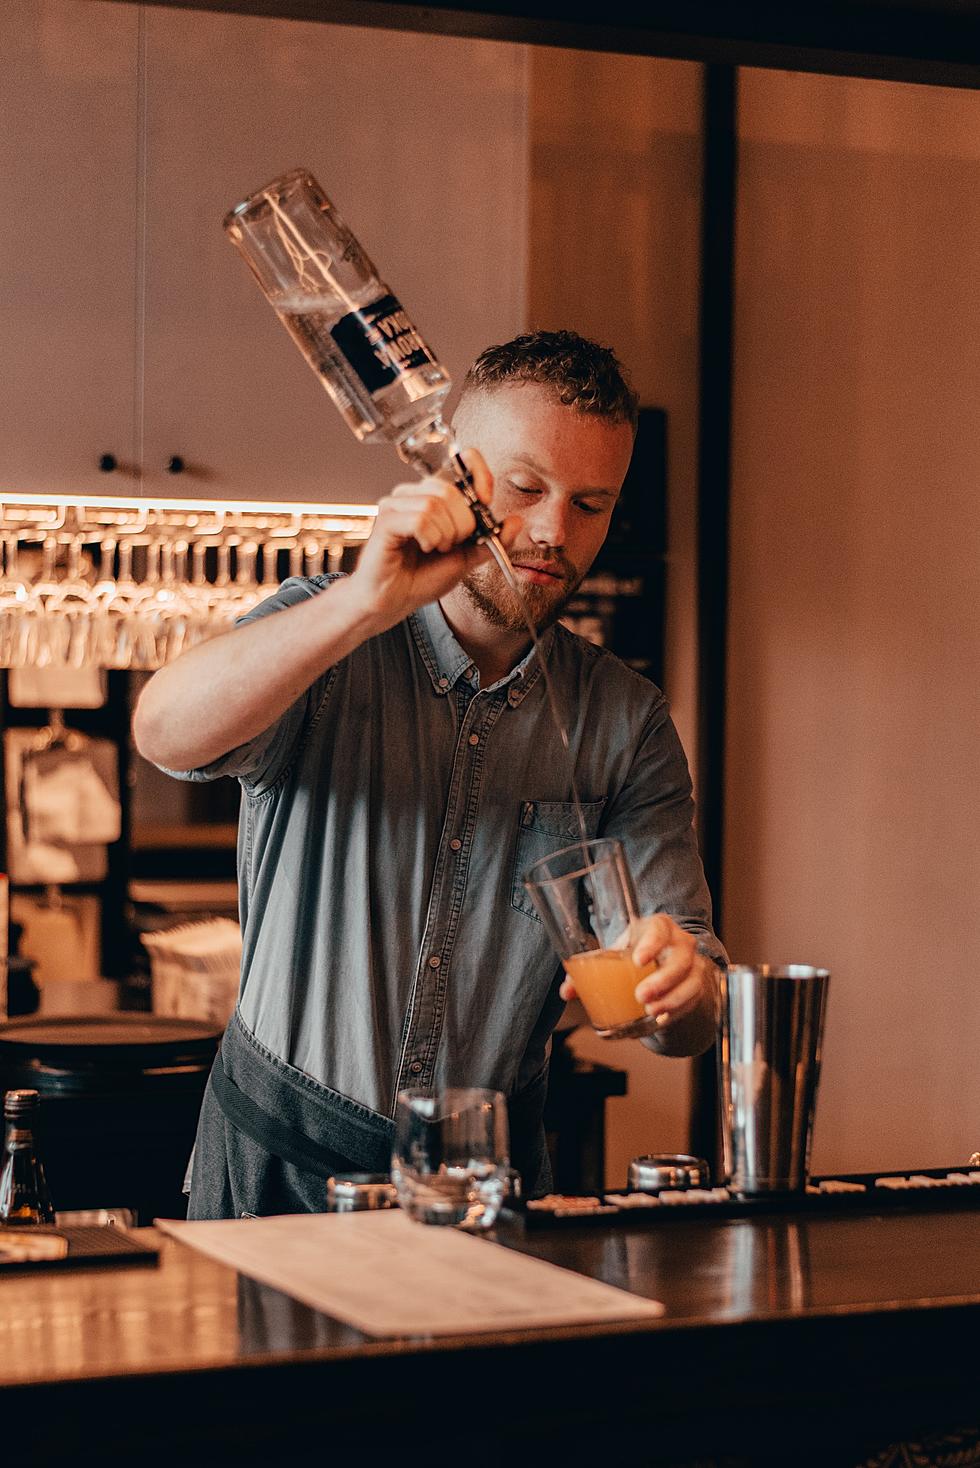 Who's Your Favorite Bartender in Southwest Michigan?